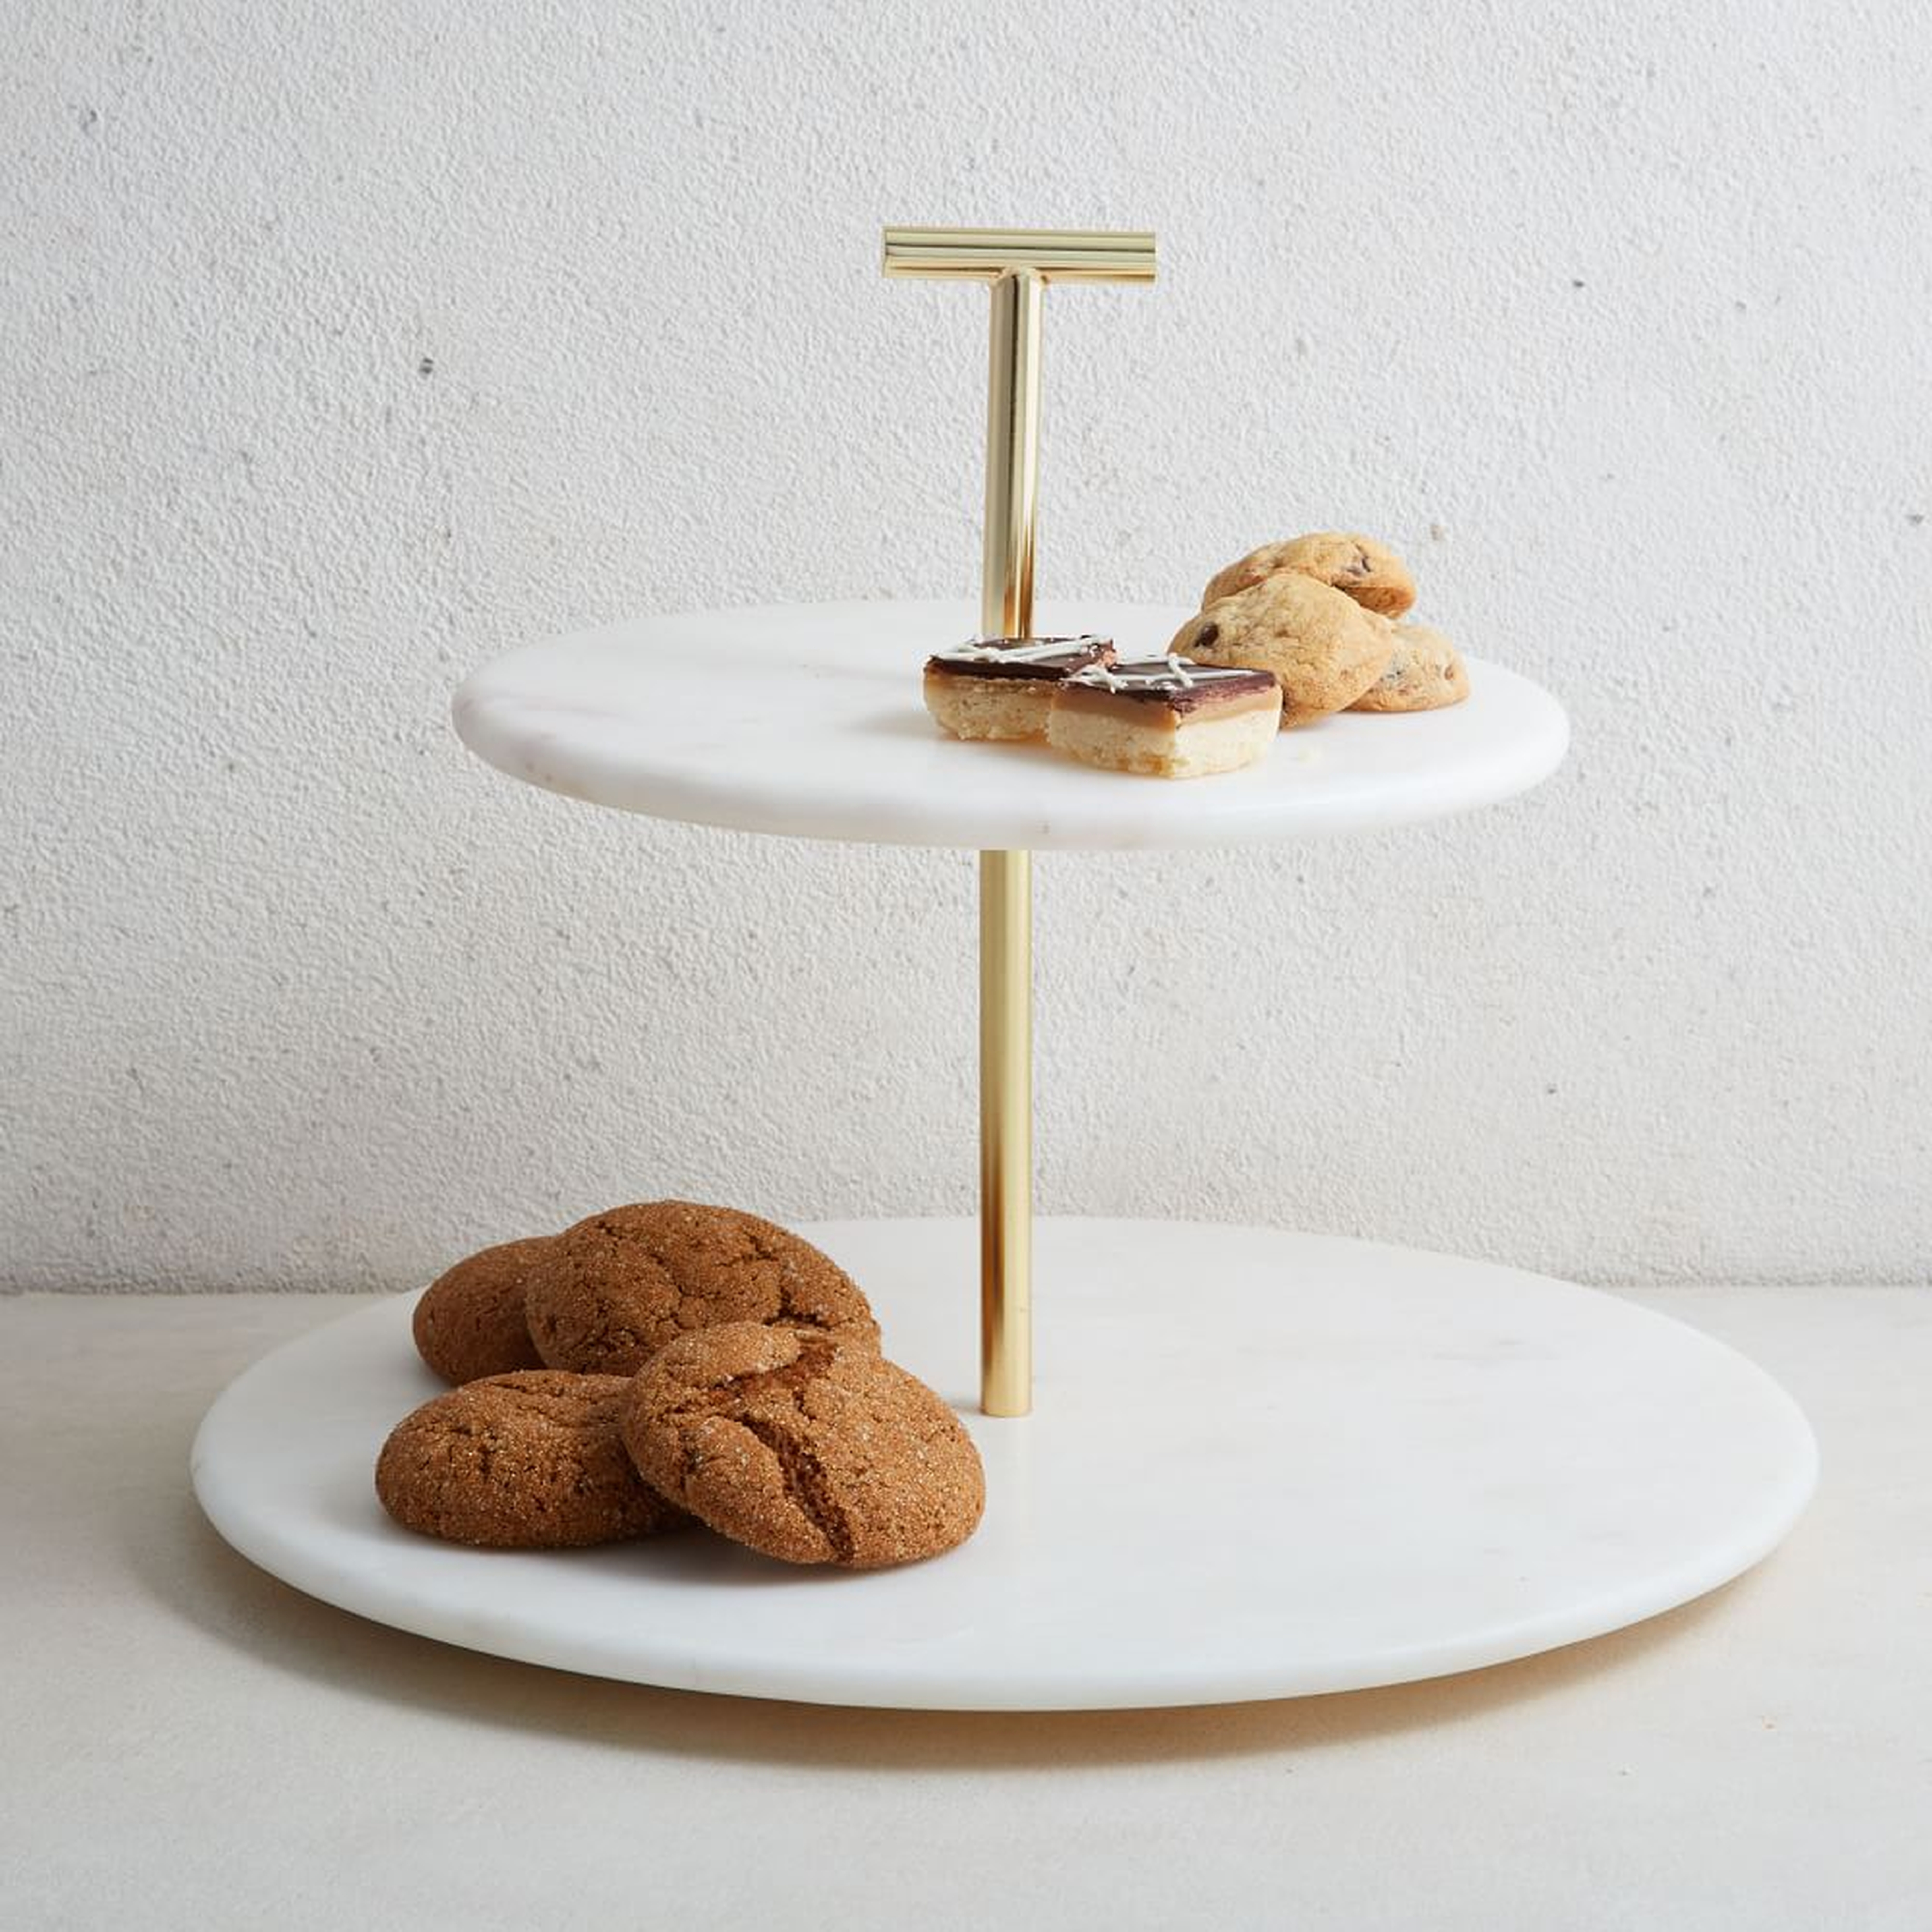 Marble + Brass 2-Tier Cake Stand, White/Gold - West Elm